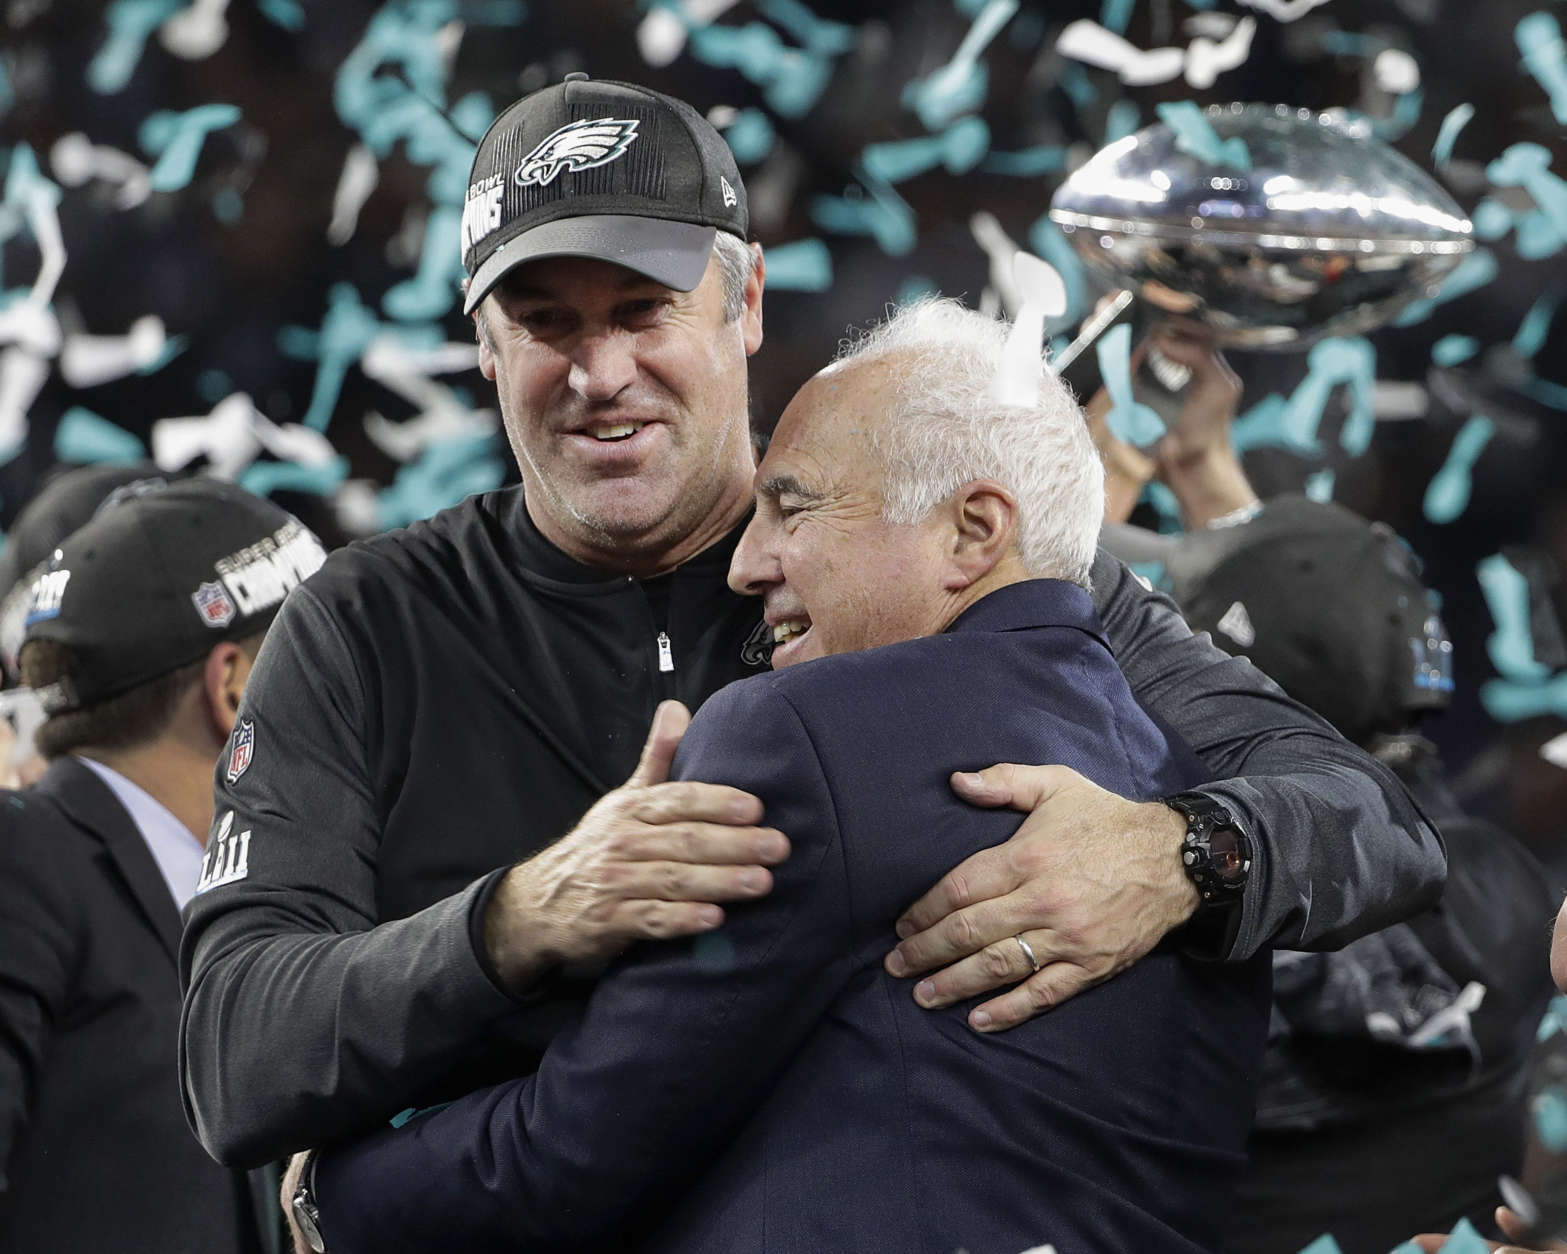 Philadelphia Eagles owner Jeffrey Lurie, right, and head coach Doug Pederson celebrate after the NFL Super Bowl 52 football game against the New England Patriots, Sunday, Feb. 4, 2018, in Minneapolis. The Eagles won 41-33. (AP Photo/Chris O'Meara)